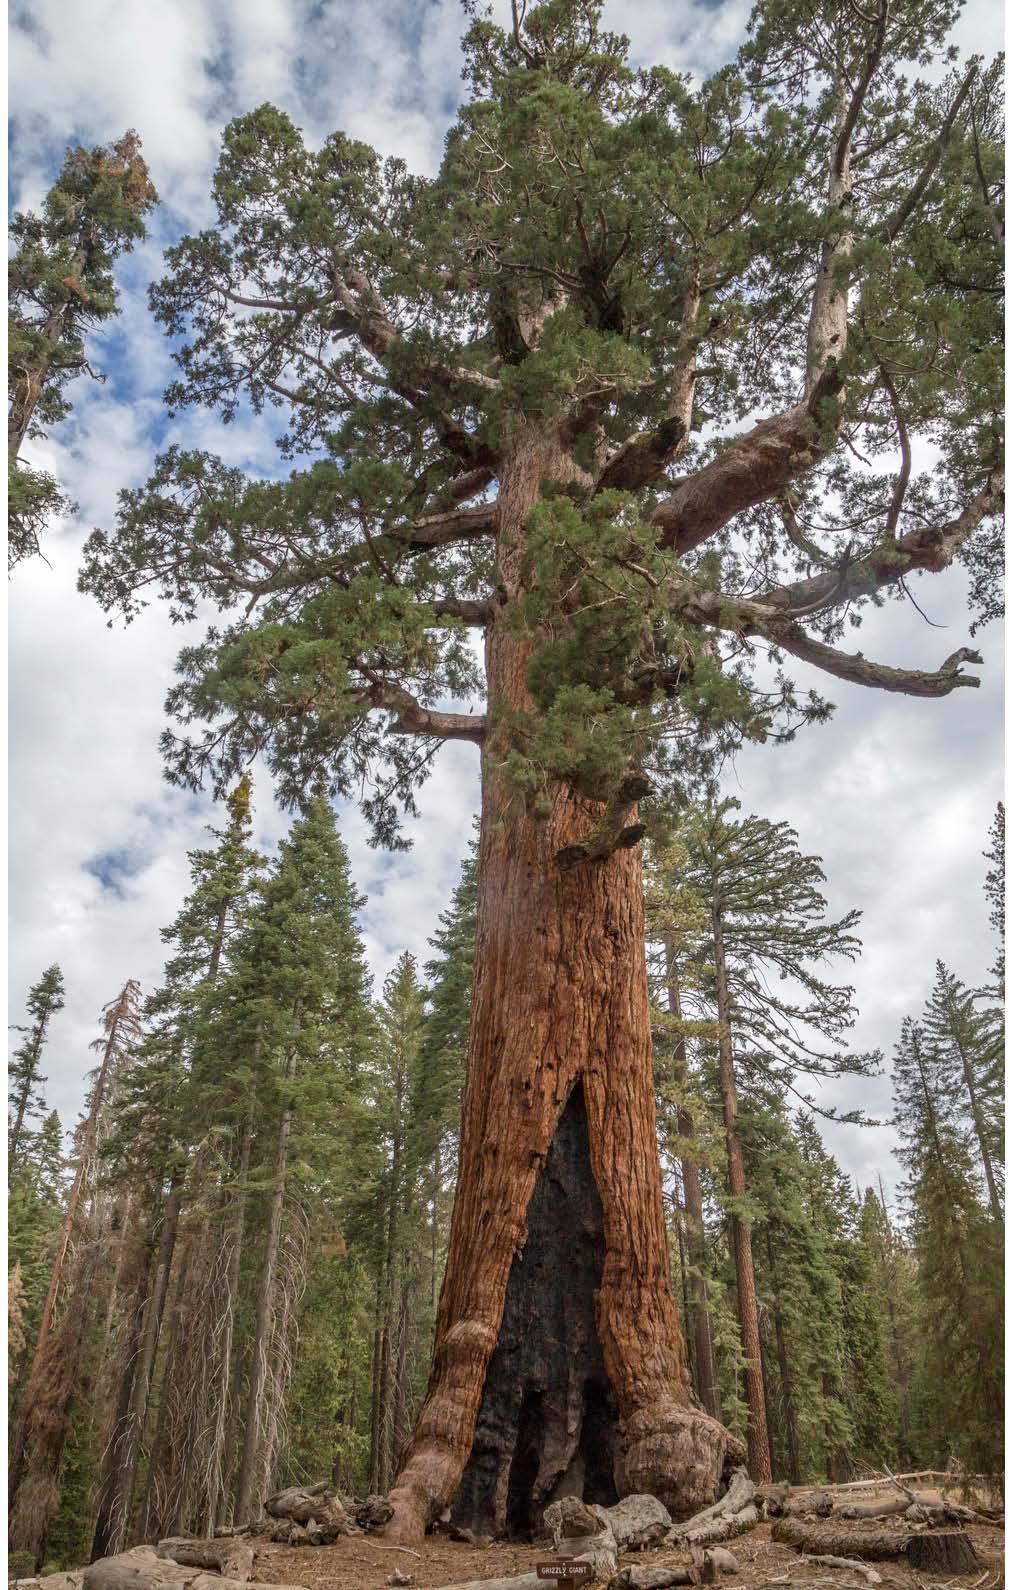 Wawona Mariposa Grove Restoration, June 2-8 Early June is a beautiful time to be in the Mariposa Grove.